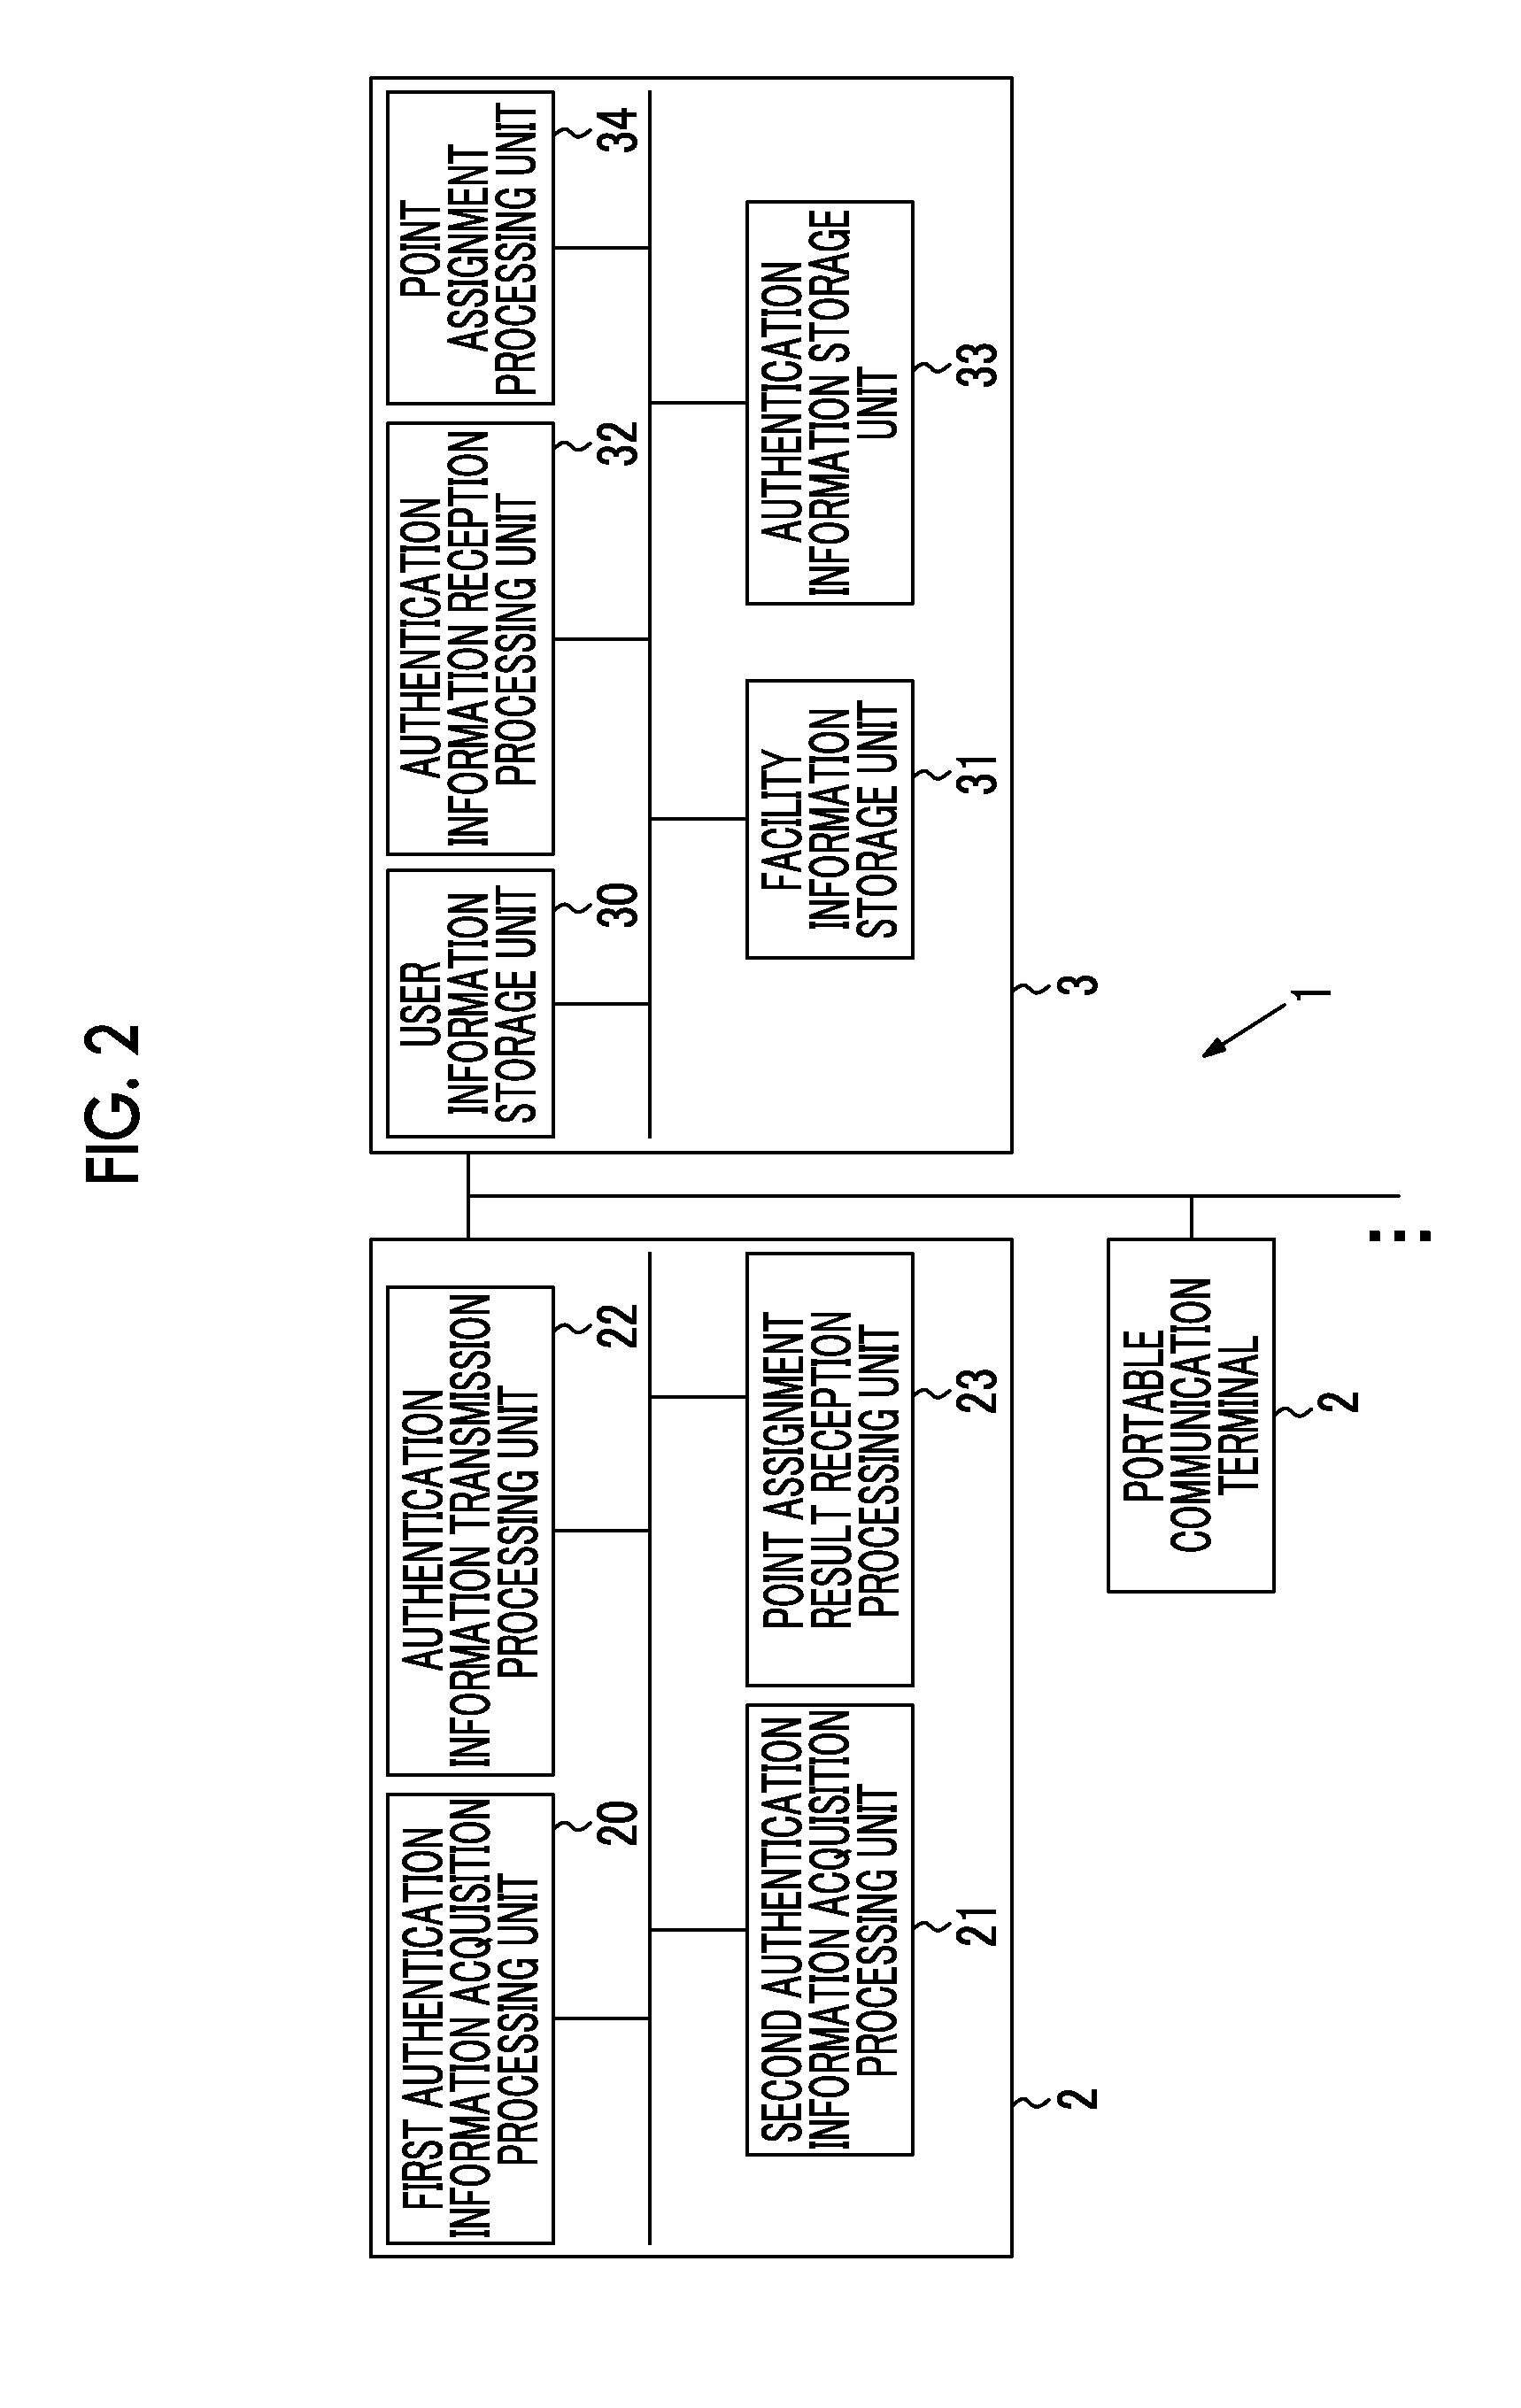 Authentication processing system